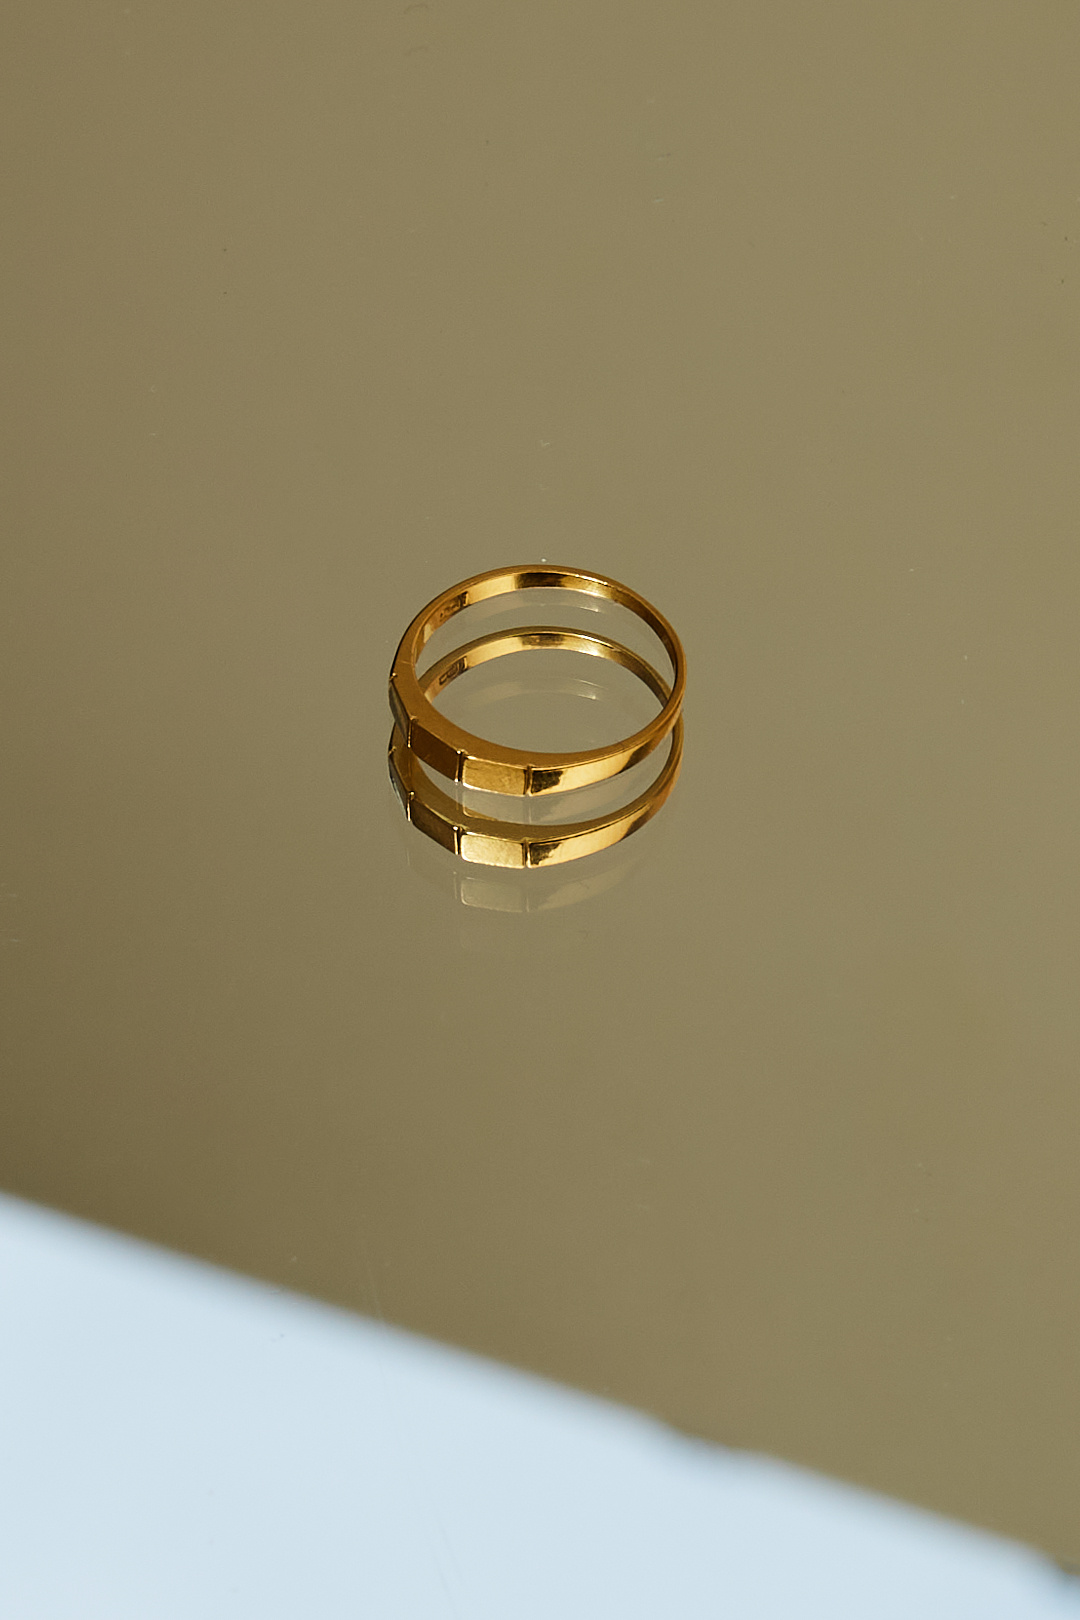 The Boyscouts apex ring gold/17mm